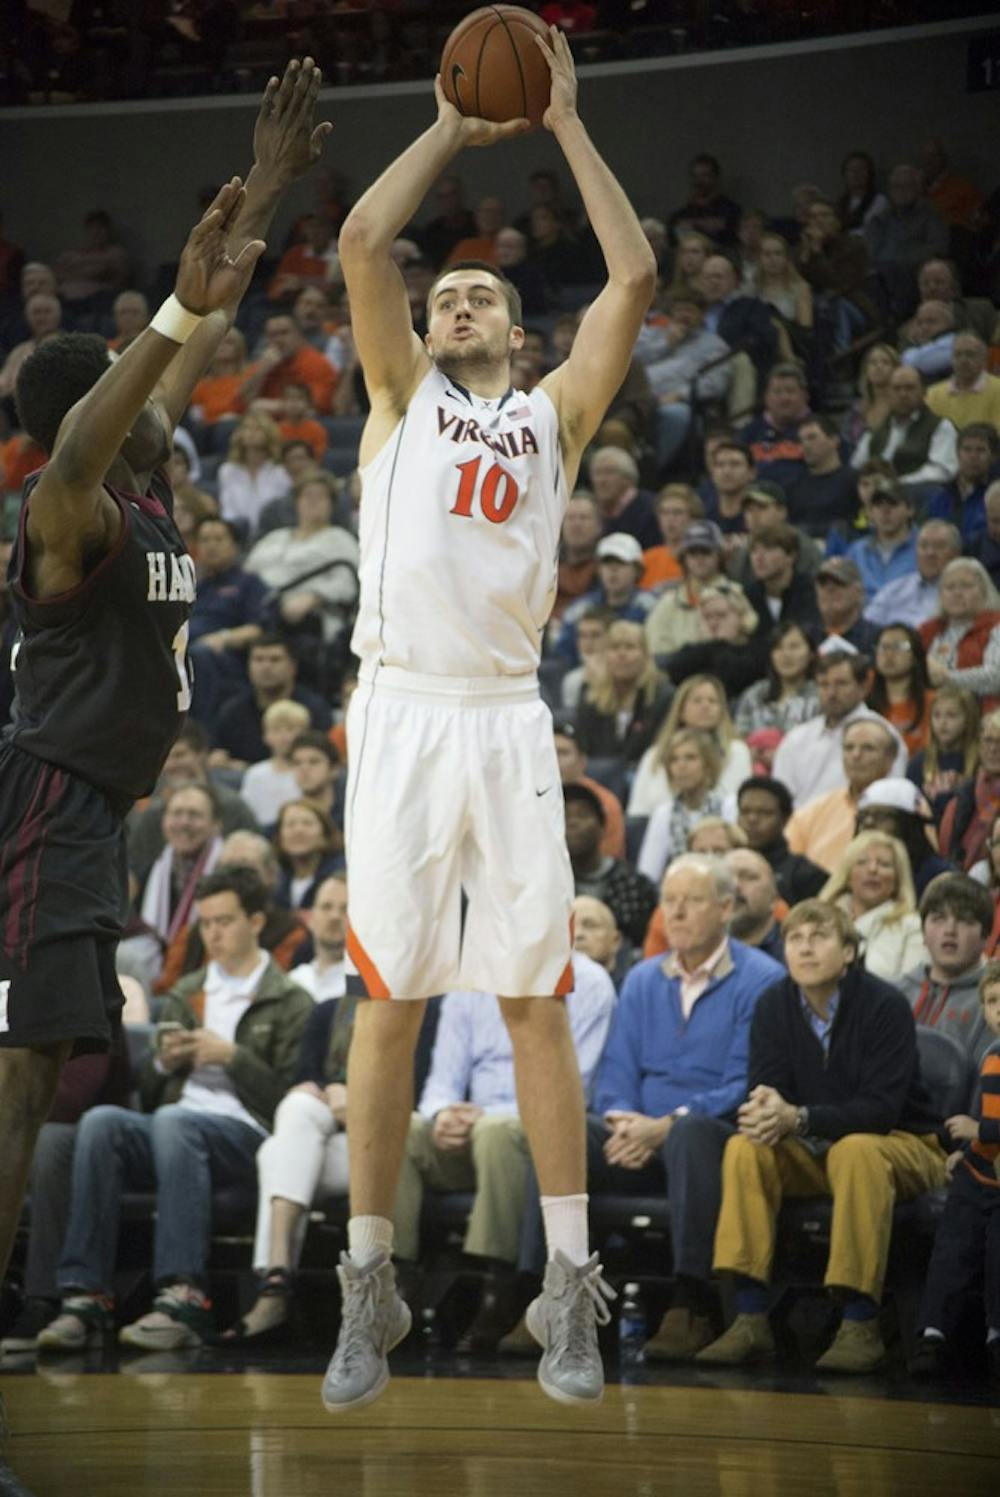 <p>Junior center Mike Tobey scored Virginia's first nine points on Sunday in Charlottesville. The Monroe, New York native finished with 15 points, 10 rebounds and two blocks for the second double-double of his collegiate career. </p>